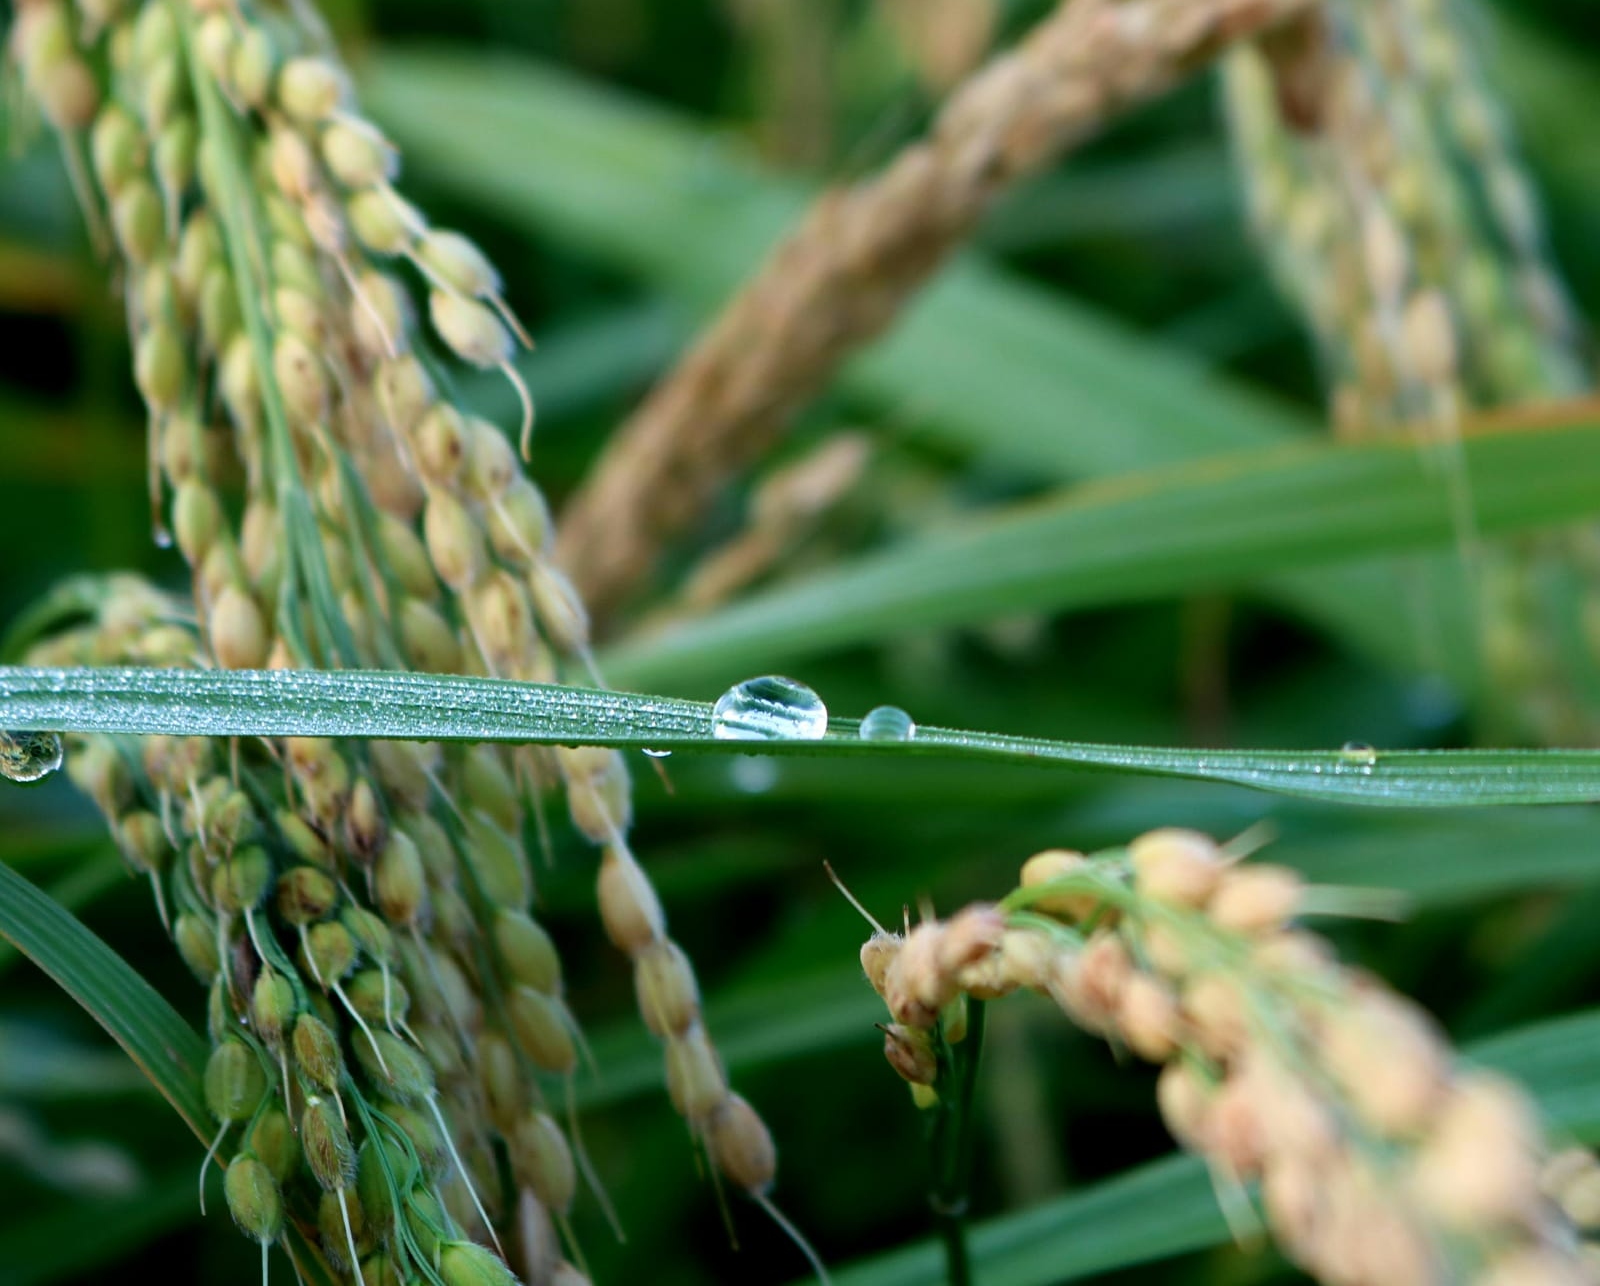 A drop of water on an ear of wheat